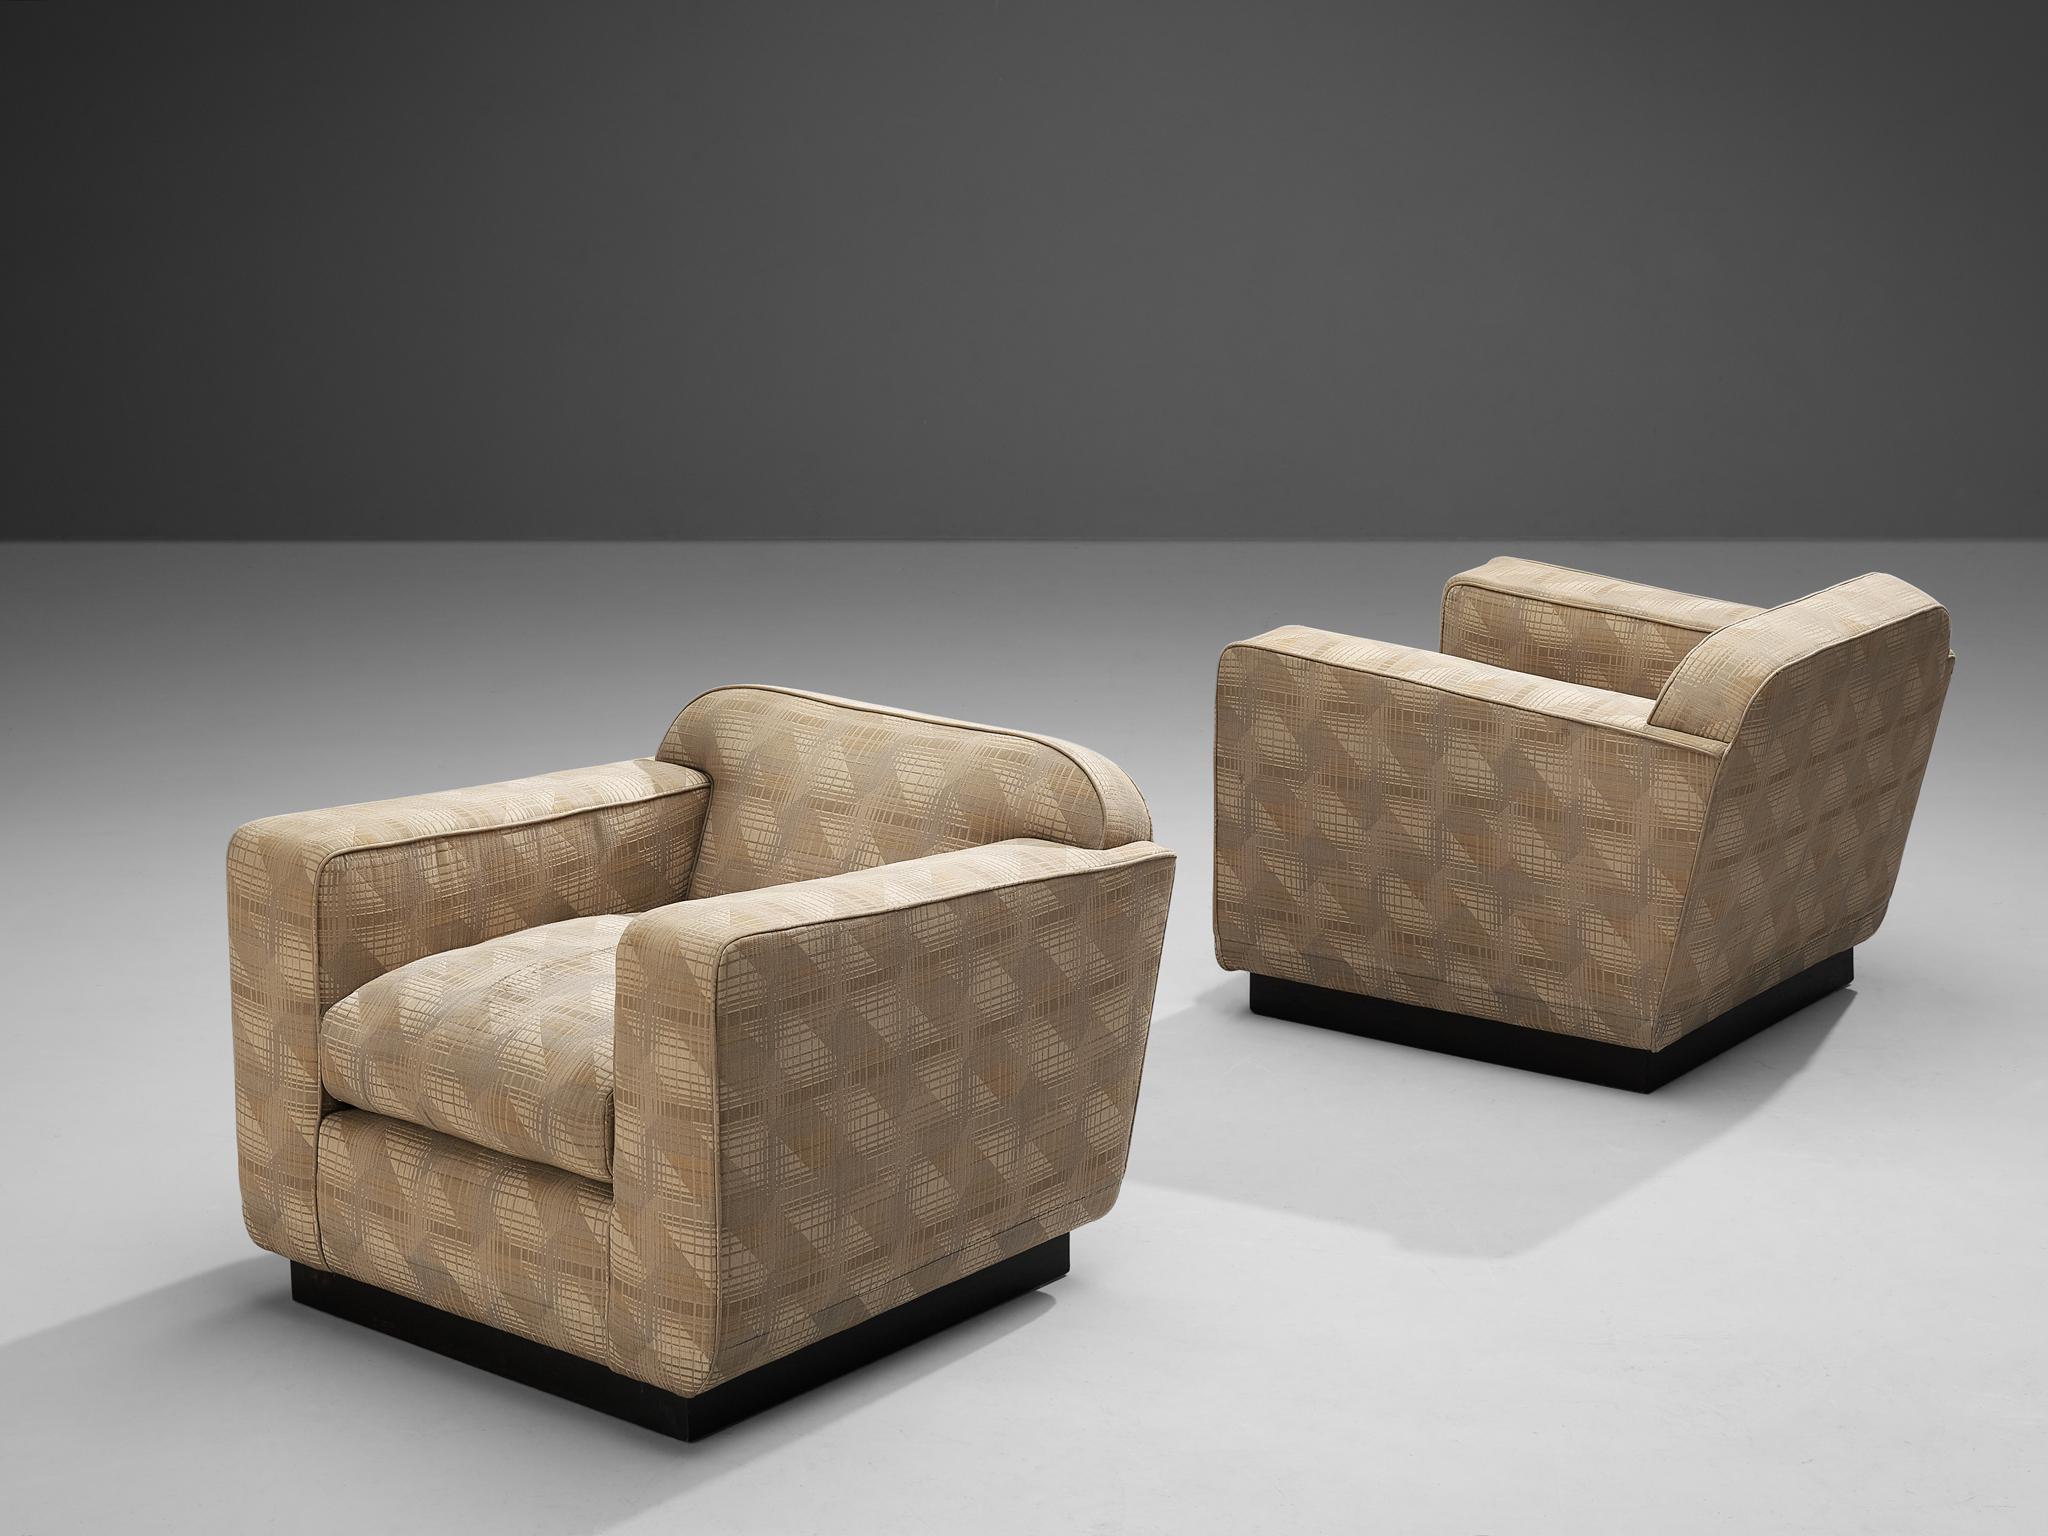 Pair of club chairs, fabric, lacquered wood, Italy, 1940s. 

Stunning pair of Art Deco armchairs with geometric patterned upholstery. Extraordinary chairs that, due to the combination of the abstract pattern and construction, allude to the Late